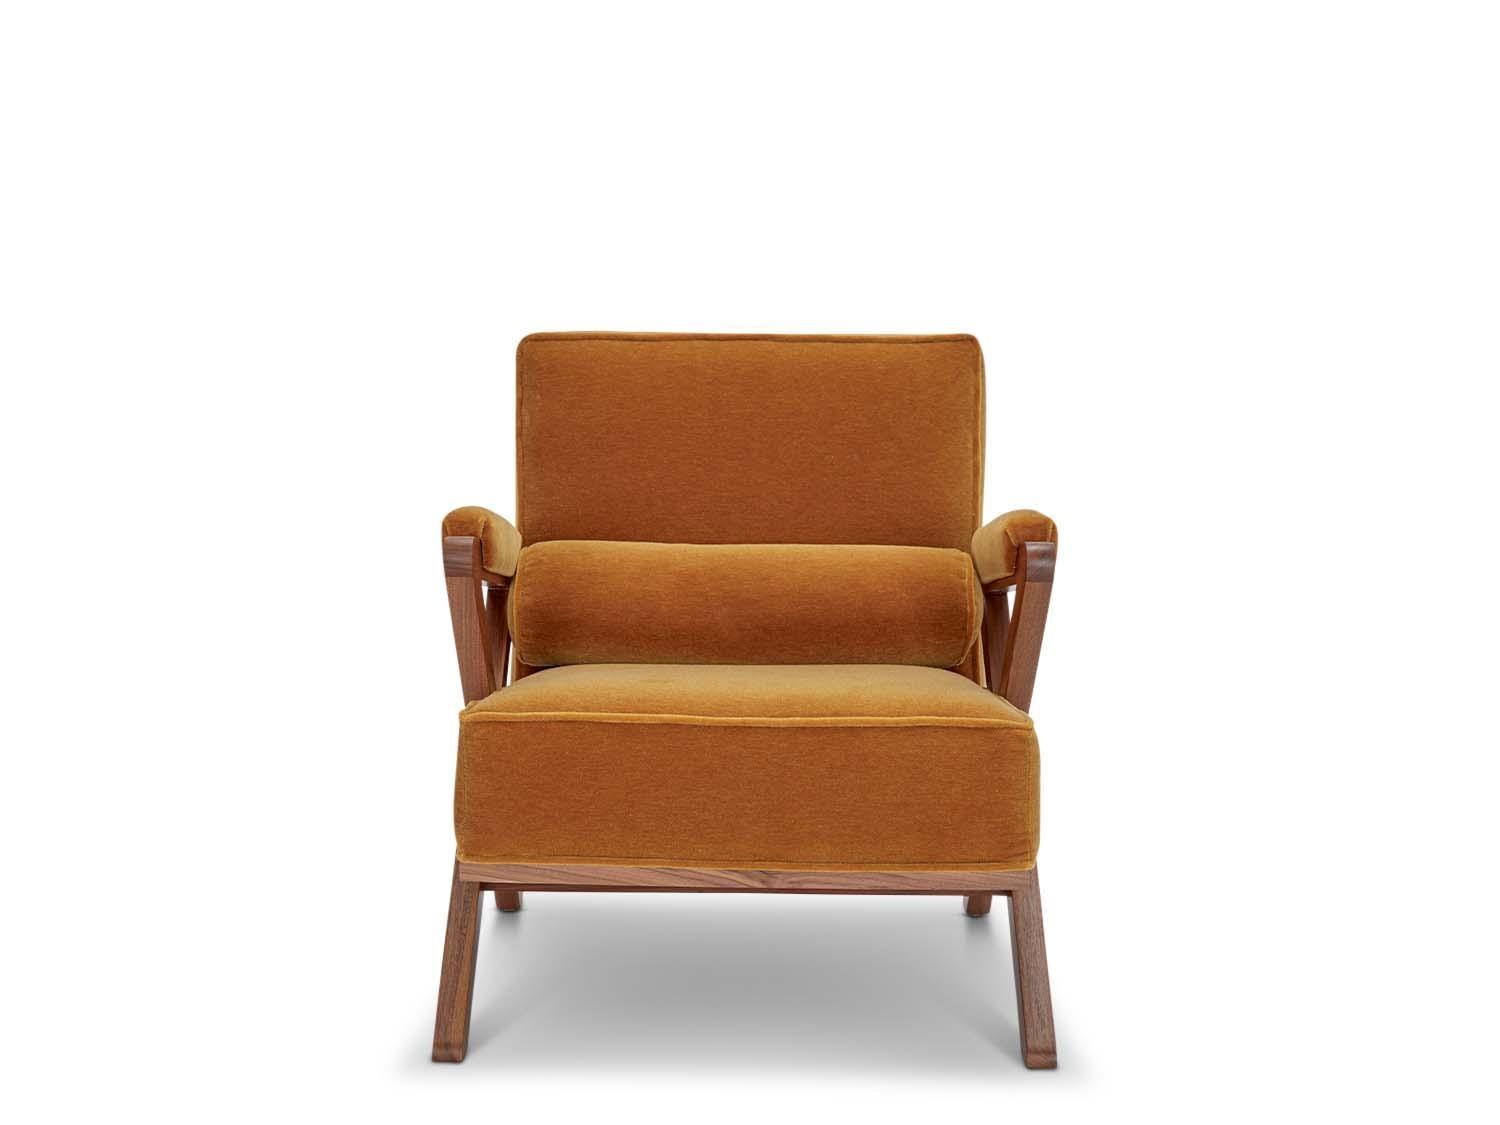 The Dillon chair has a solid American walnut or white oak x-based frame that features boxed cushions with piping and buttons on the back cushion. 

 The Lawson-Fenning Collection is designed and handmade in Los Angeles, California. Reach out to